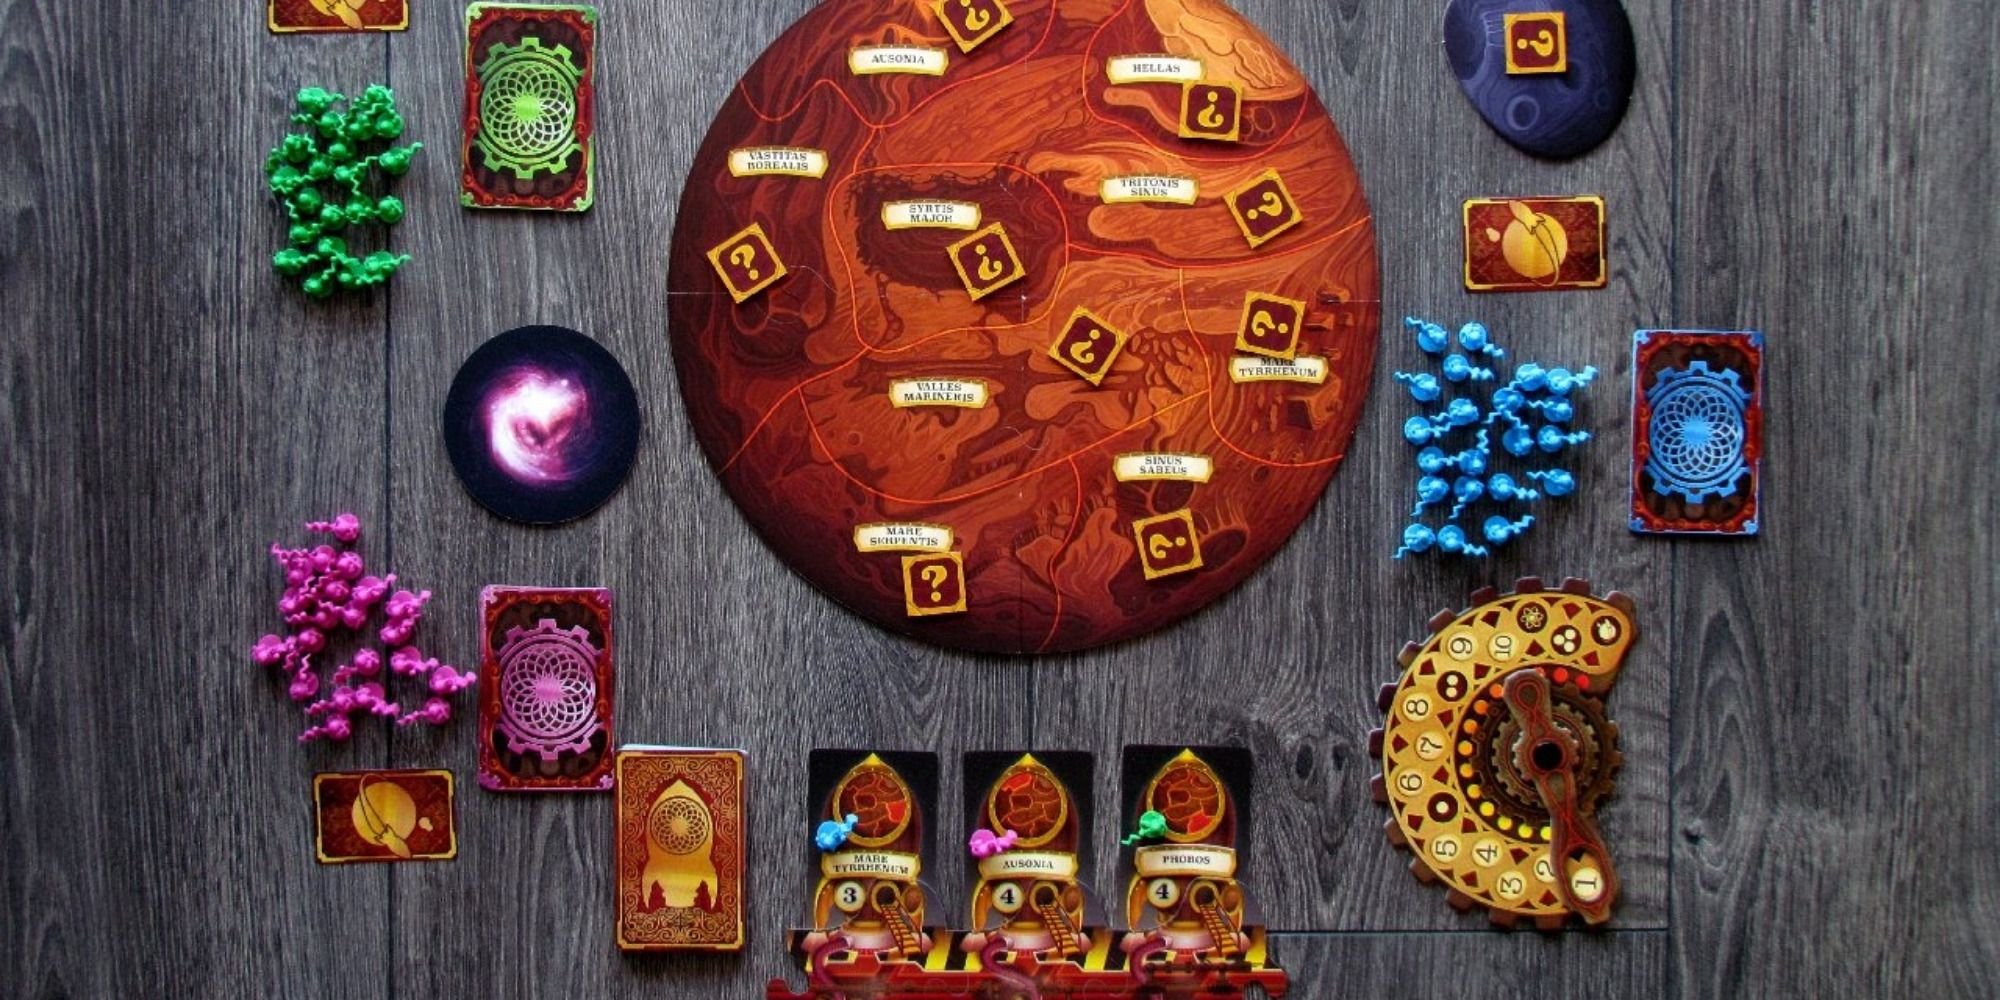 A steampunk-inspired board game showing Victorian-era rockets and astronauts mining resources on a Martian landscape in Mission: Red Planet.